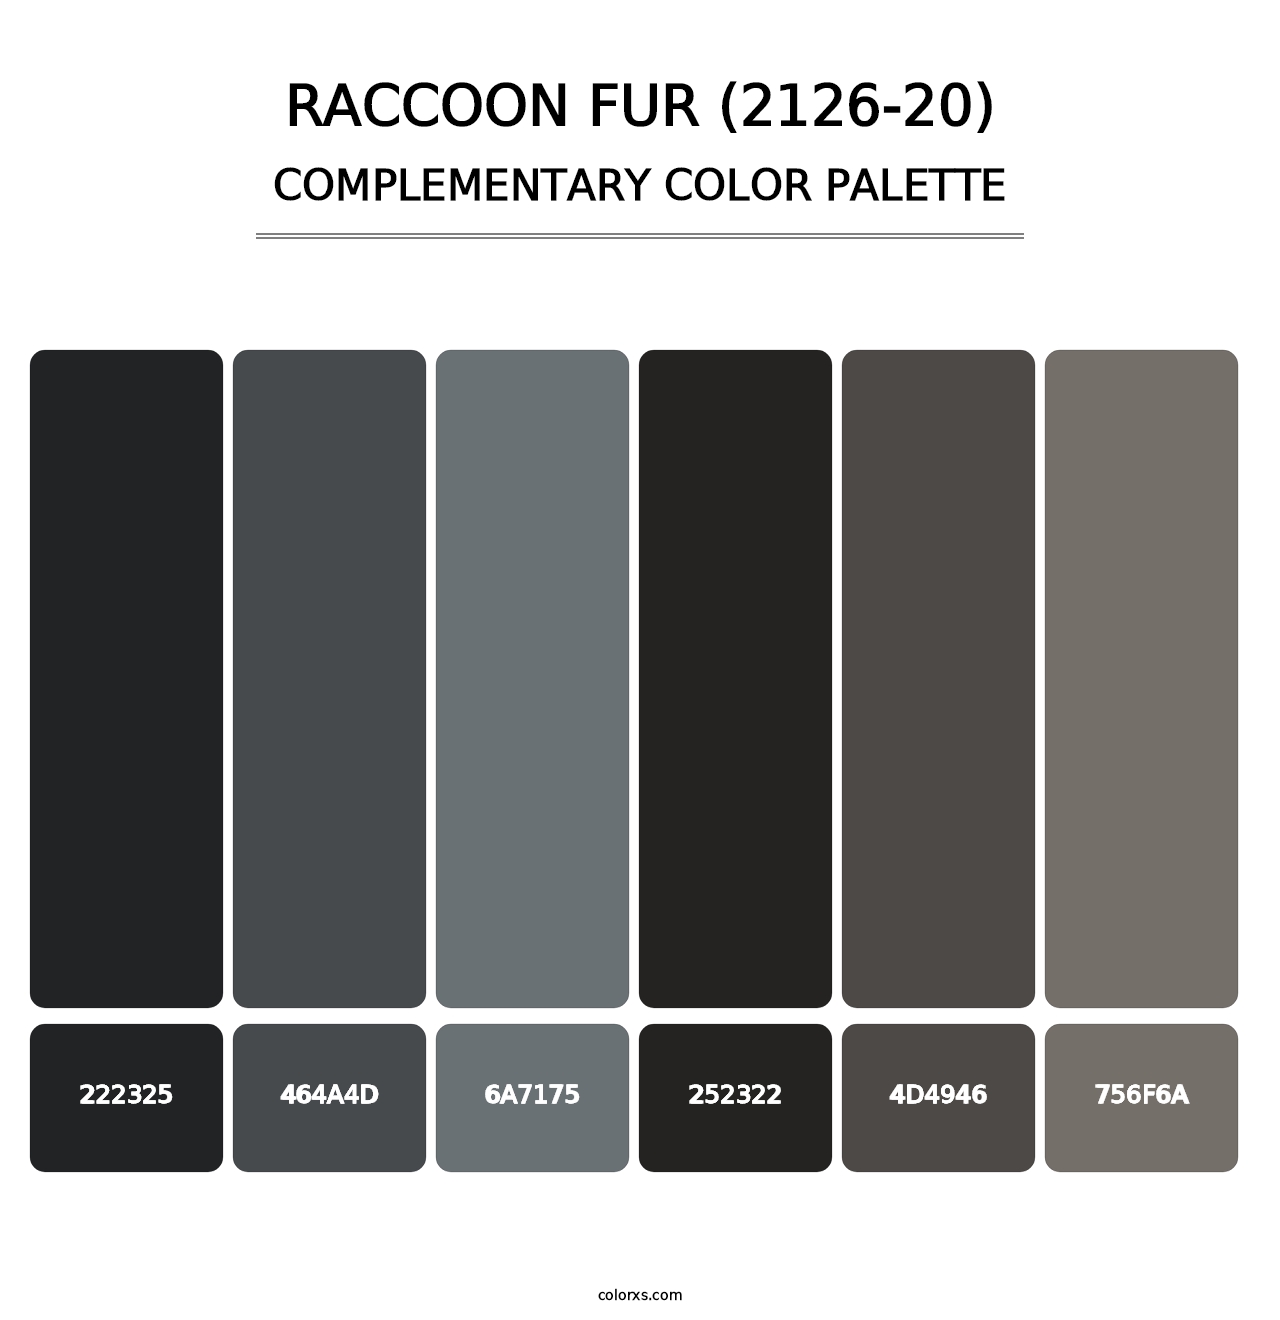 Raccoon Fur (2126-20) - Complementary Color Palette